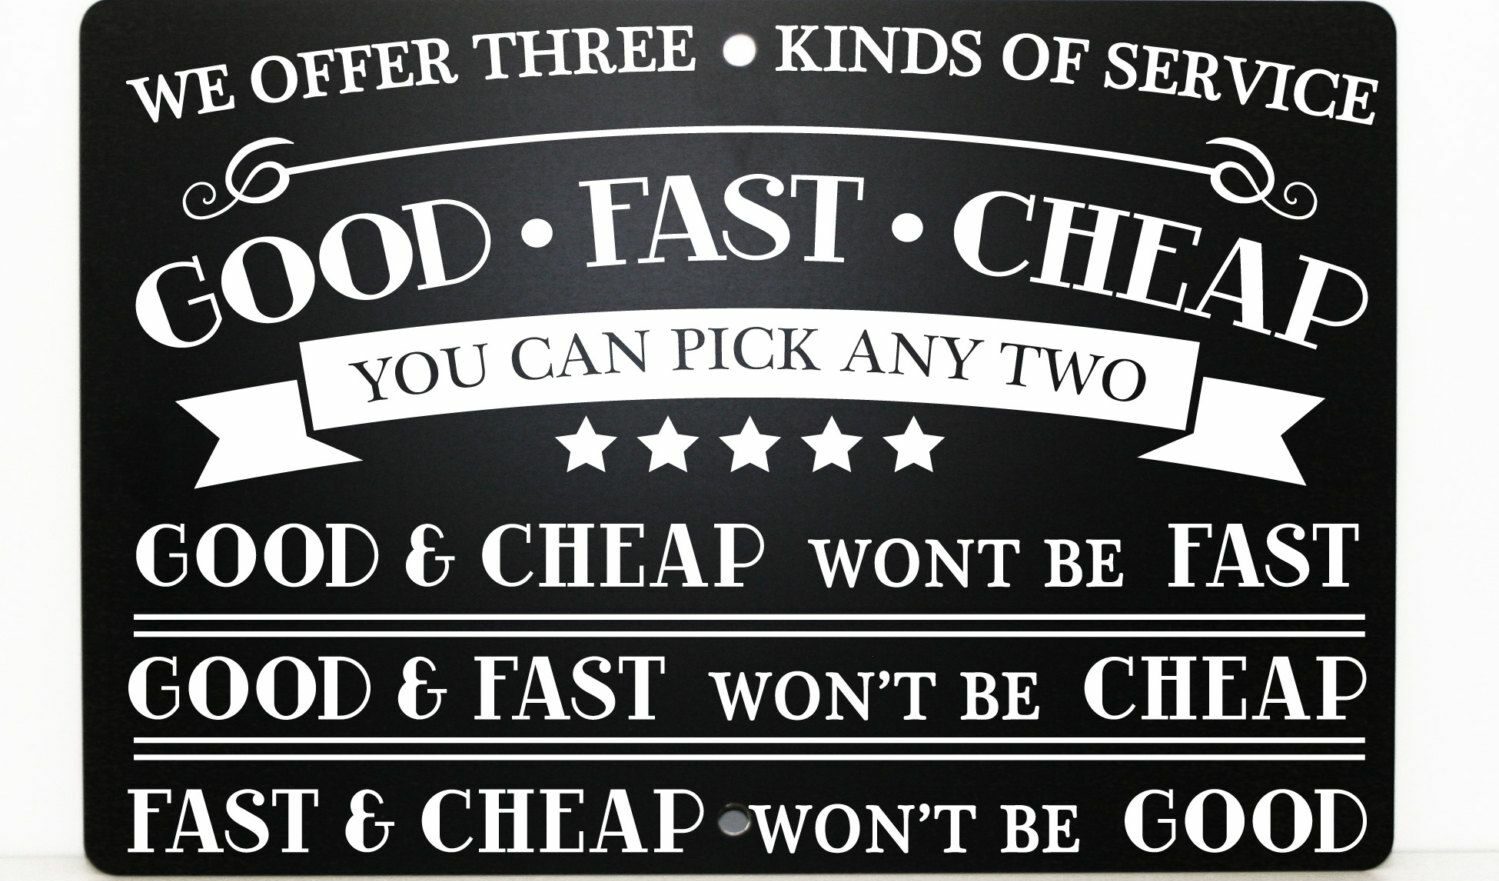 GOOD, FAST, CHEAP: Pick Any Two – A Simple Business Axiom Can Lead to Better IT Systems